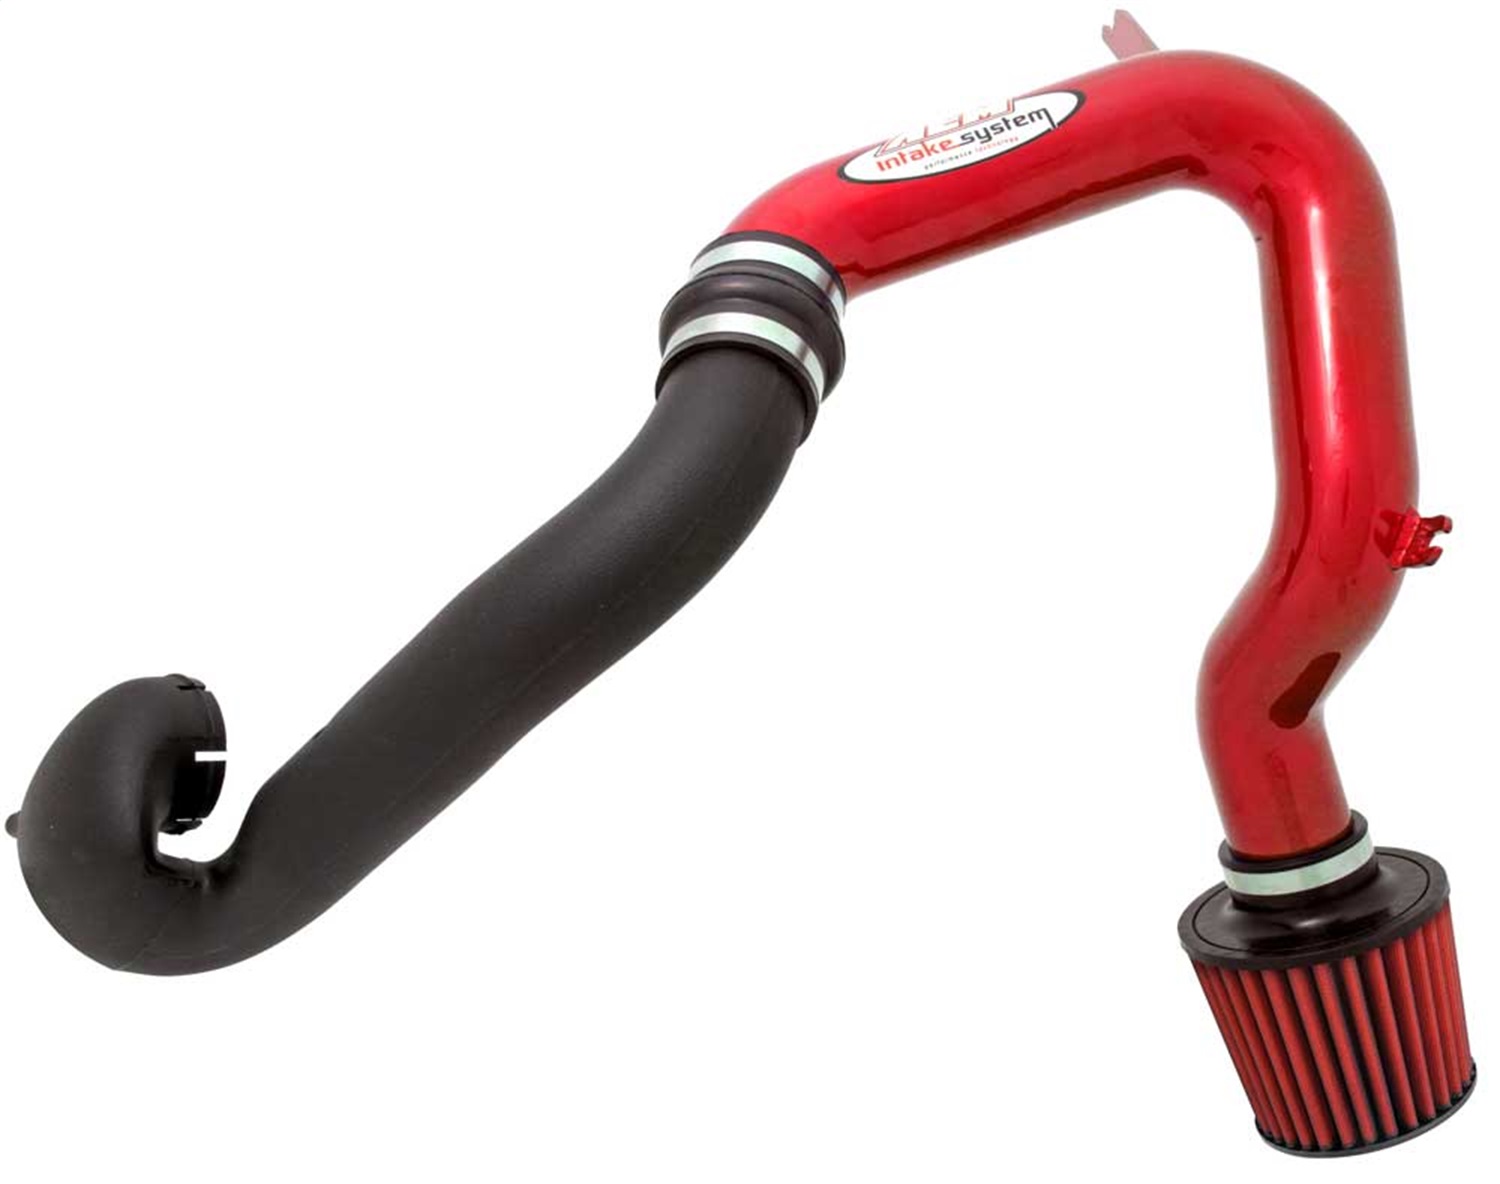 AEM Induction AEM Induction 21-448R Cold Air Induction System Fits 03-05 Cavalier Sunfire